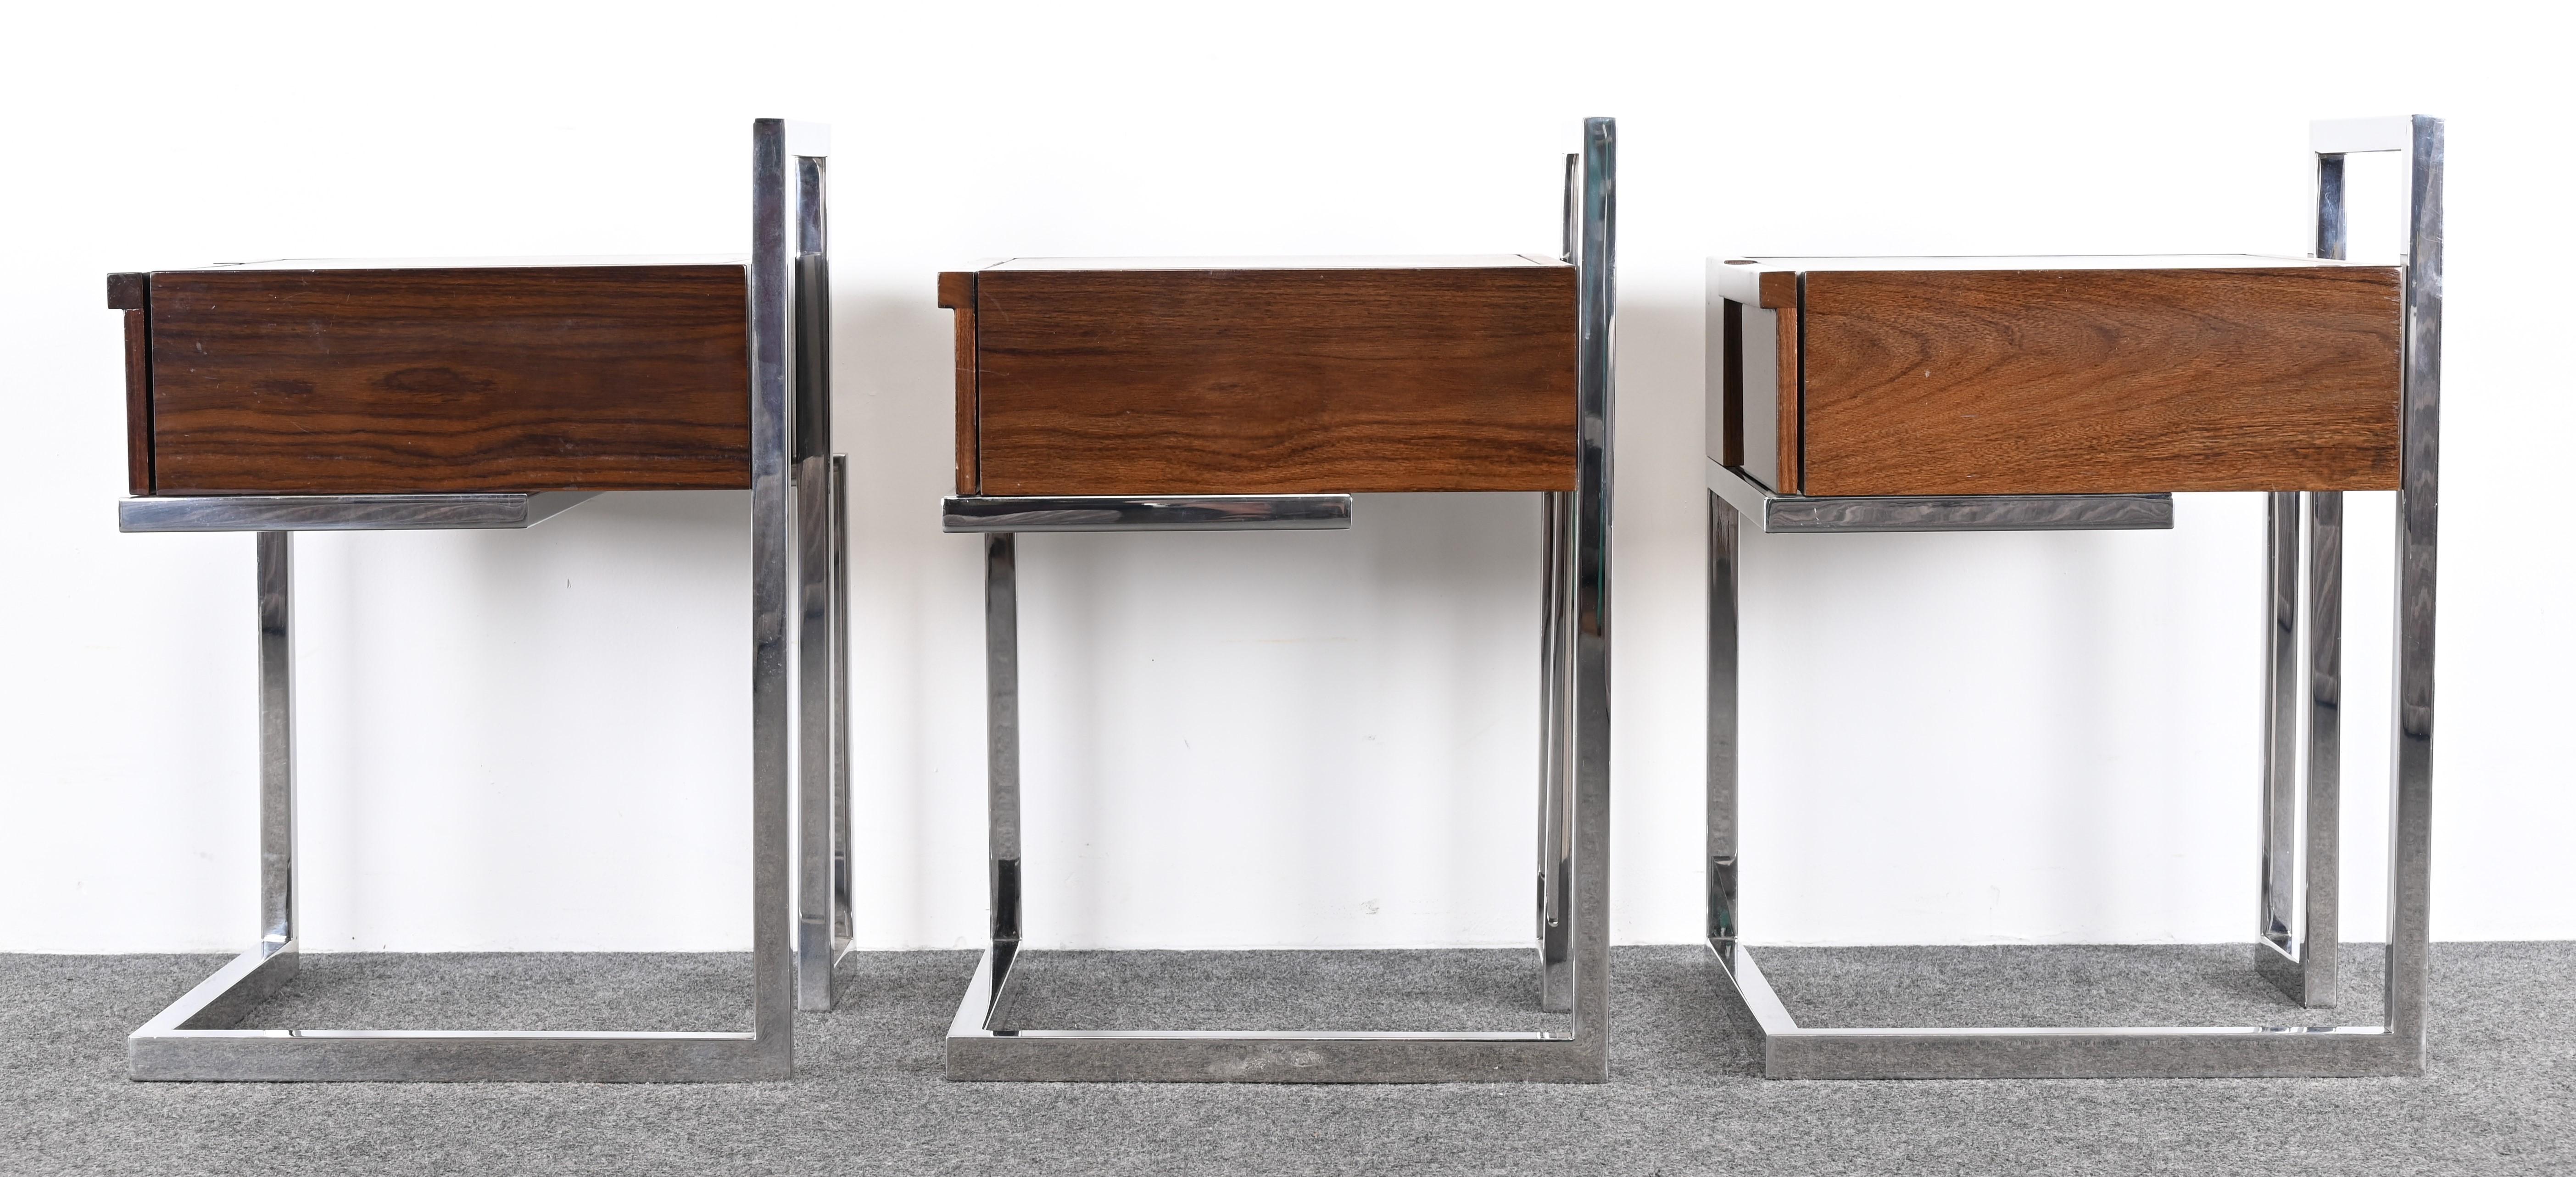 Lacquered Walnut and Stainless Steel End Tables by Vladimir Kagan for Gucci For Sale 6